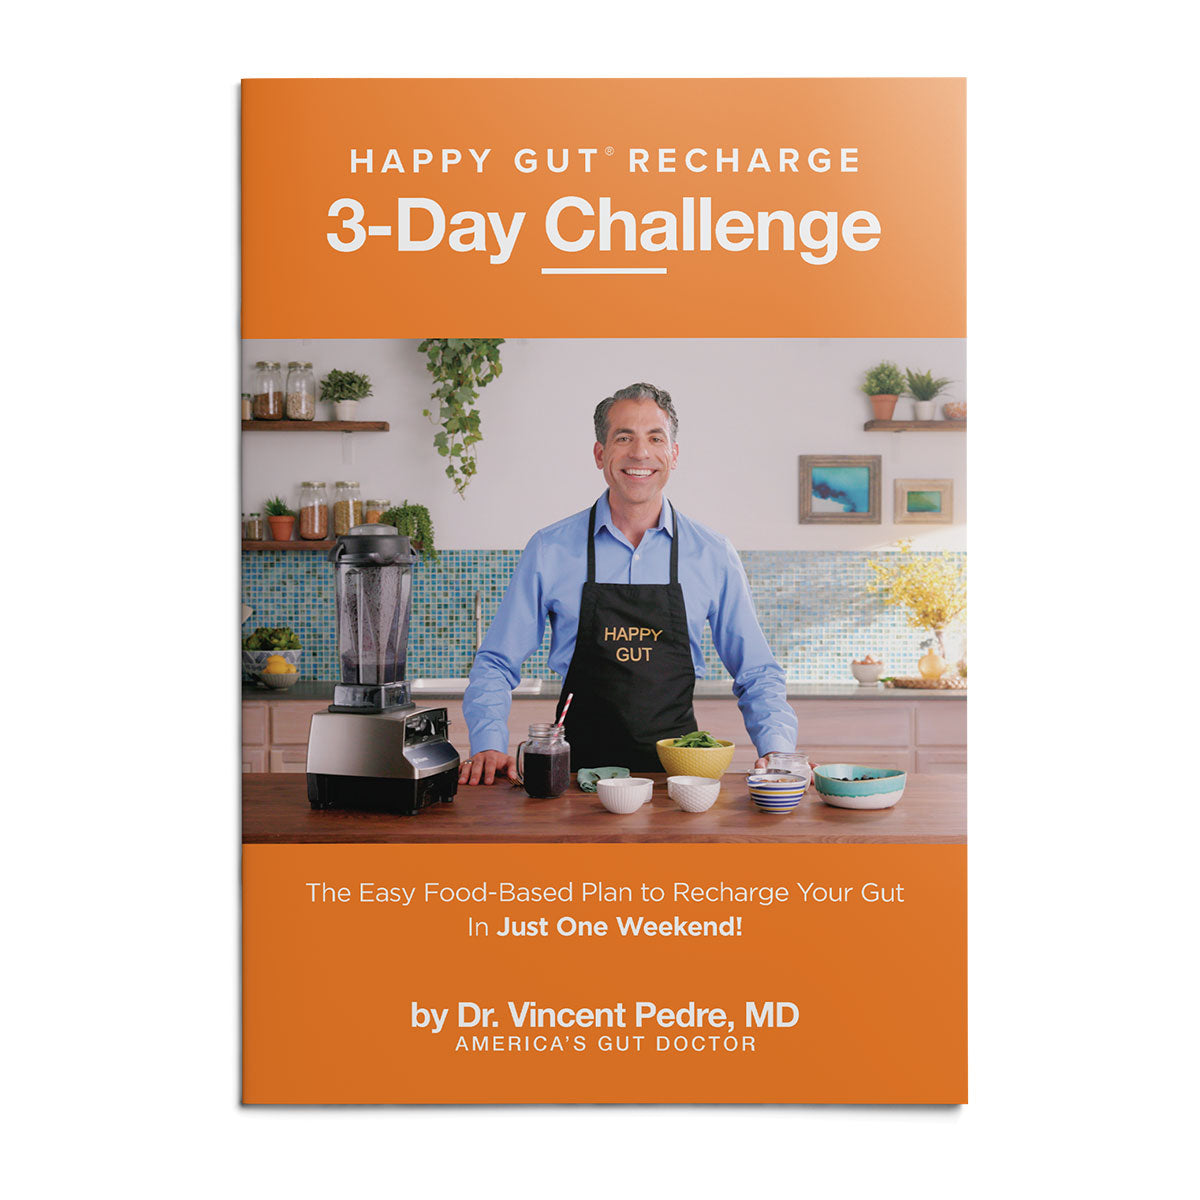 HAPPY GUT® RECHARGE 3-Day Challenge Guide